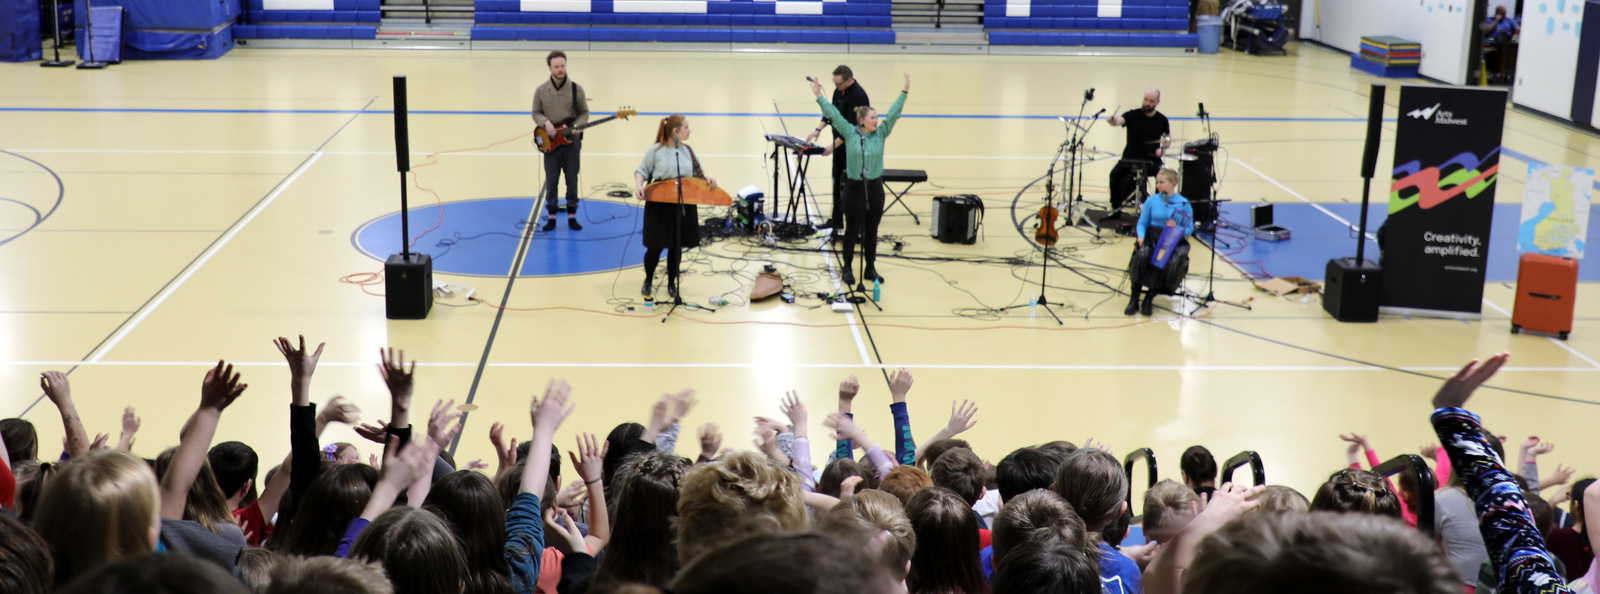 A band performs for a school of elementary students with their backs facing the camera, arms waving in the air.